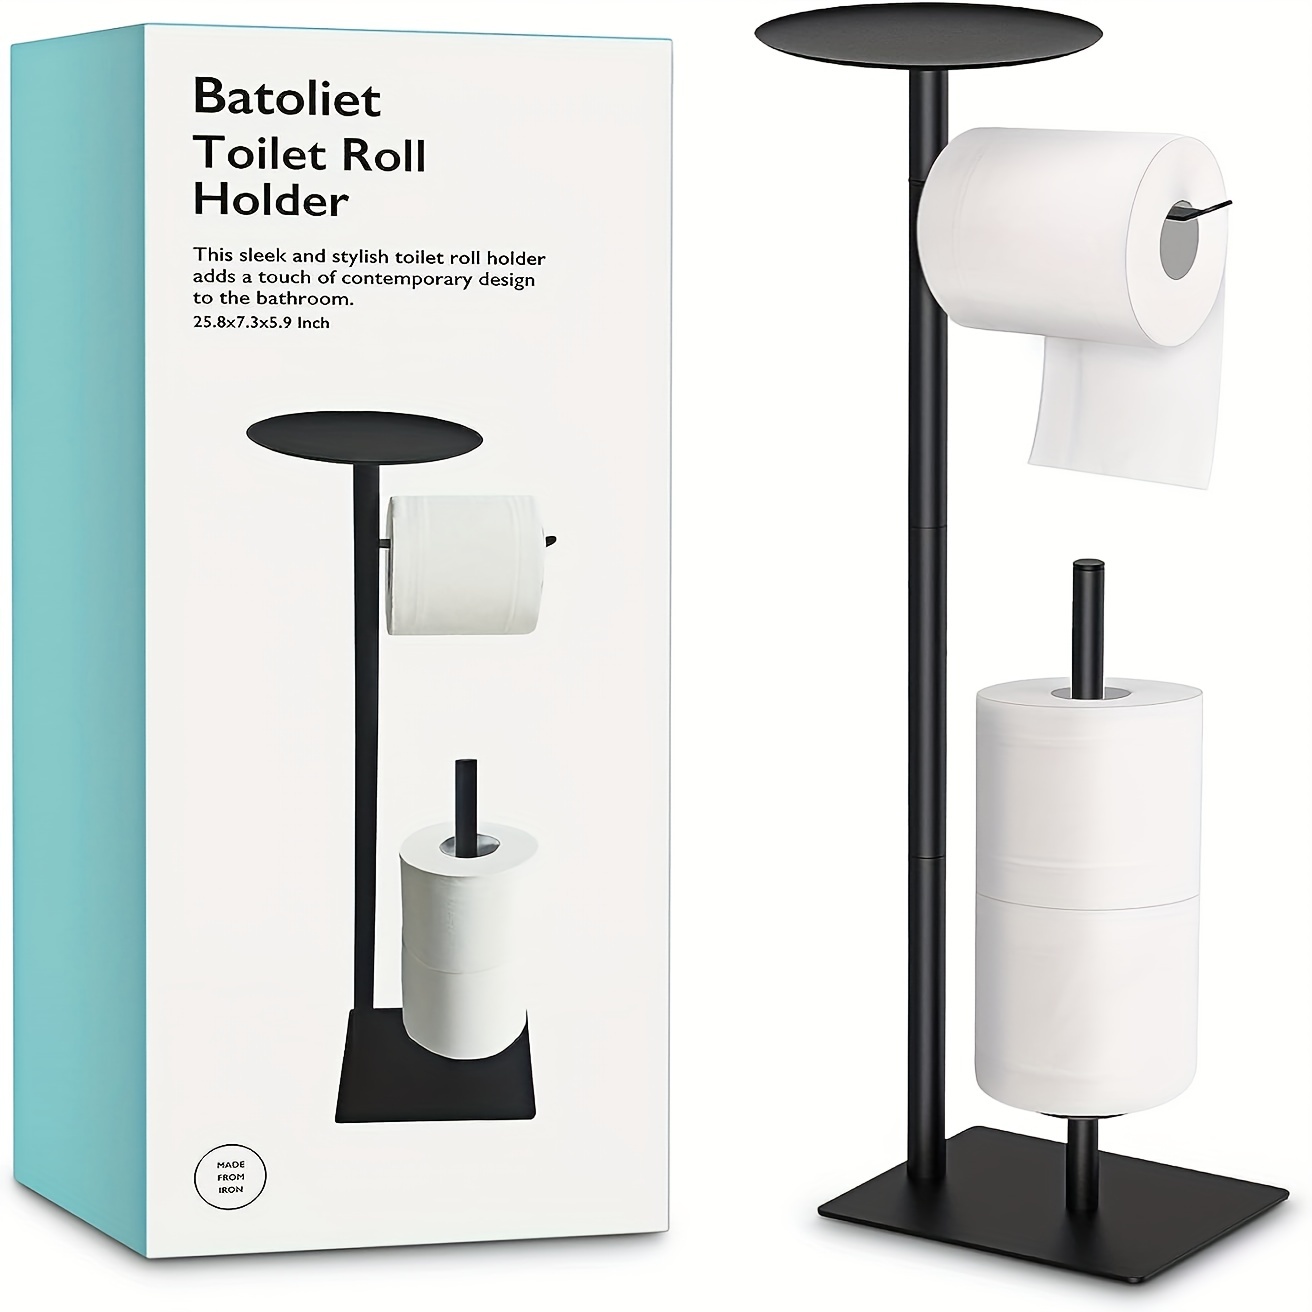  Toilet Paper Holder Stand with Shelf, Free Standing